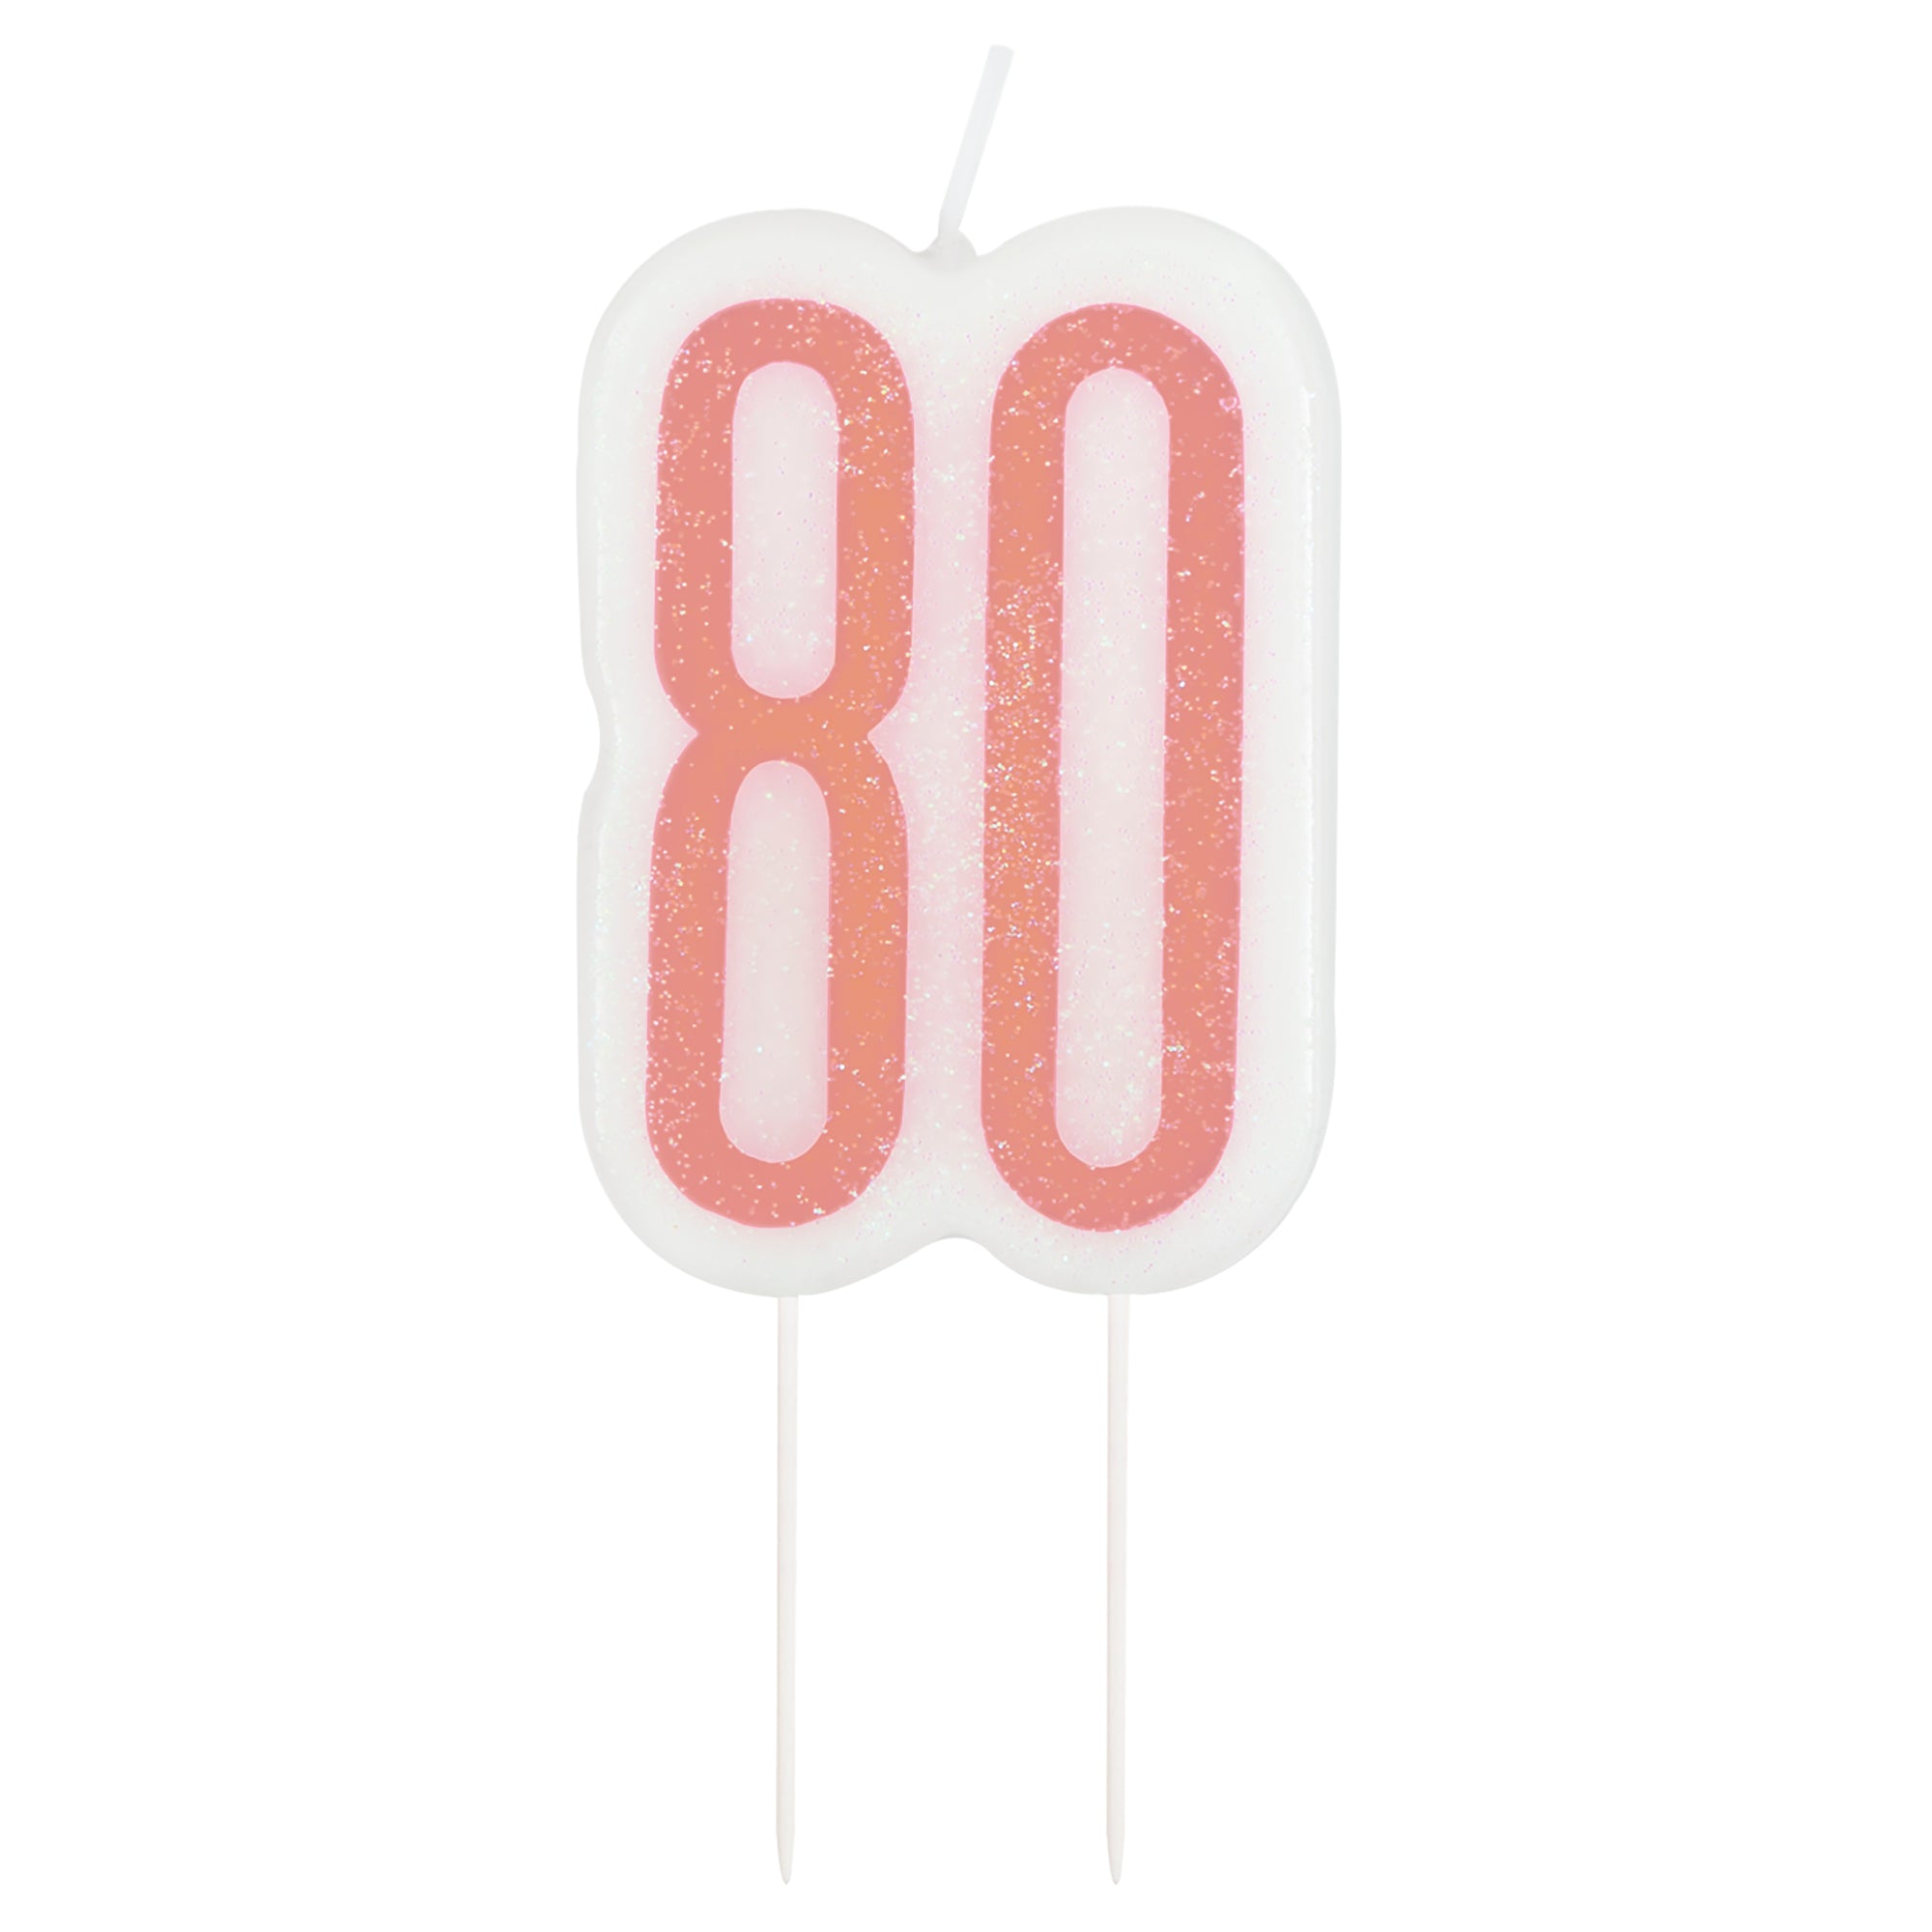 Age 80 Pink Birthday Candle 3.5in